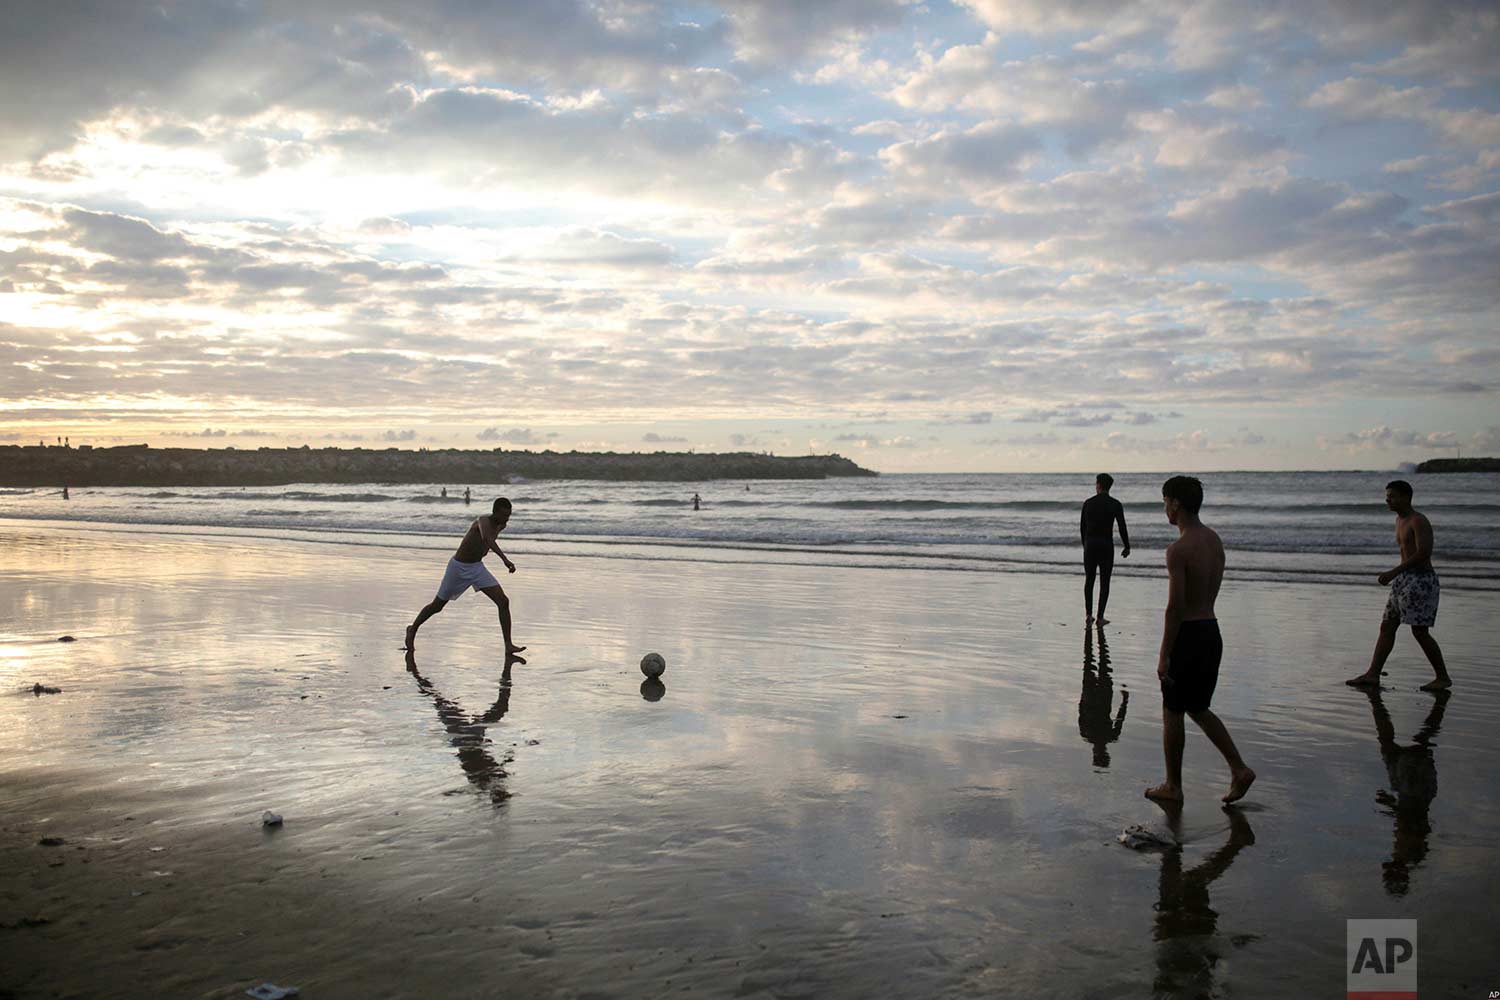  In this photo taken on Saturday, June 9, 2018, boys are silhouetted against the sunset light as they play football on the beach, minutes before breaking their fast in the holy month of Ramadan, in Rabat, Morocco. (AP Photo/Mosa'ab Elshamy) 